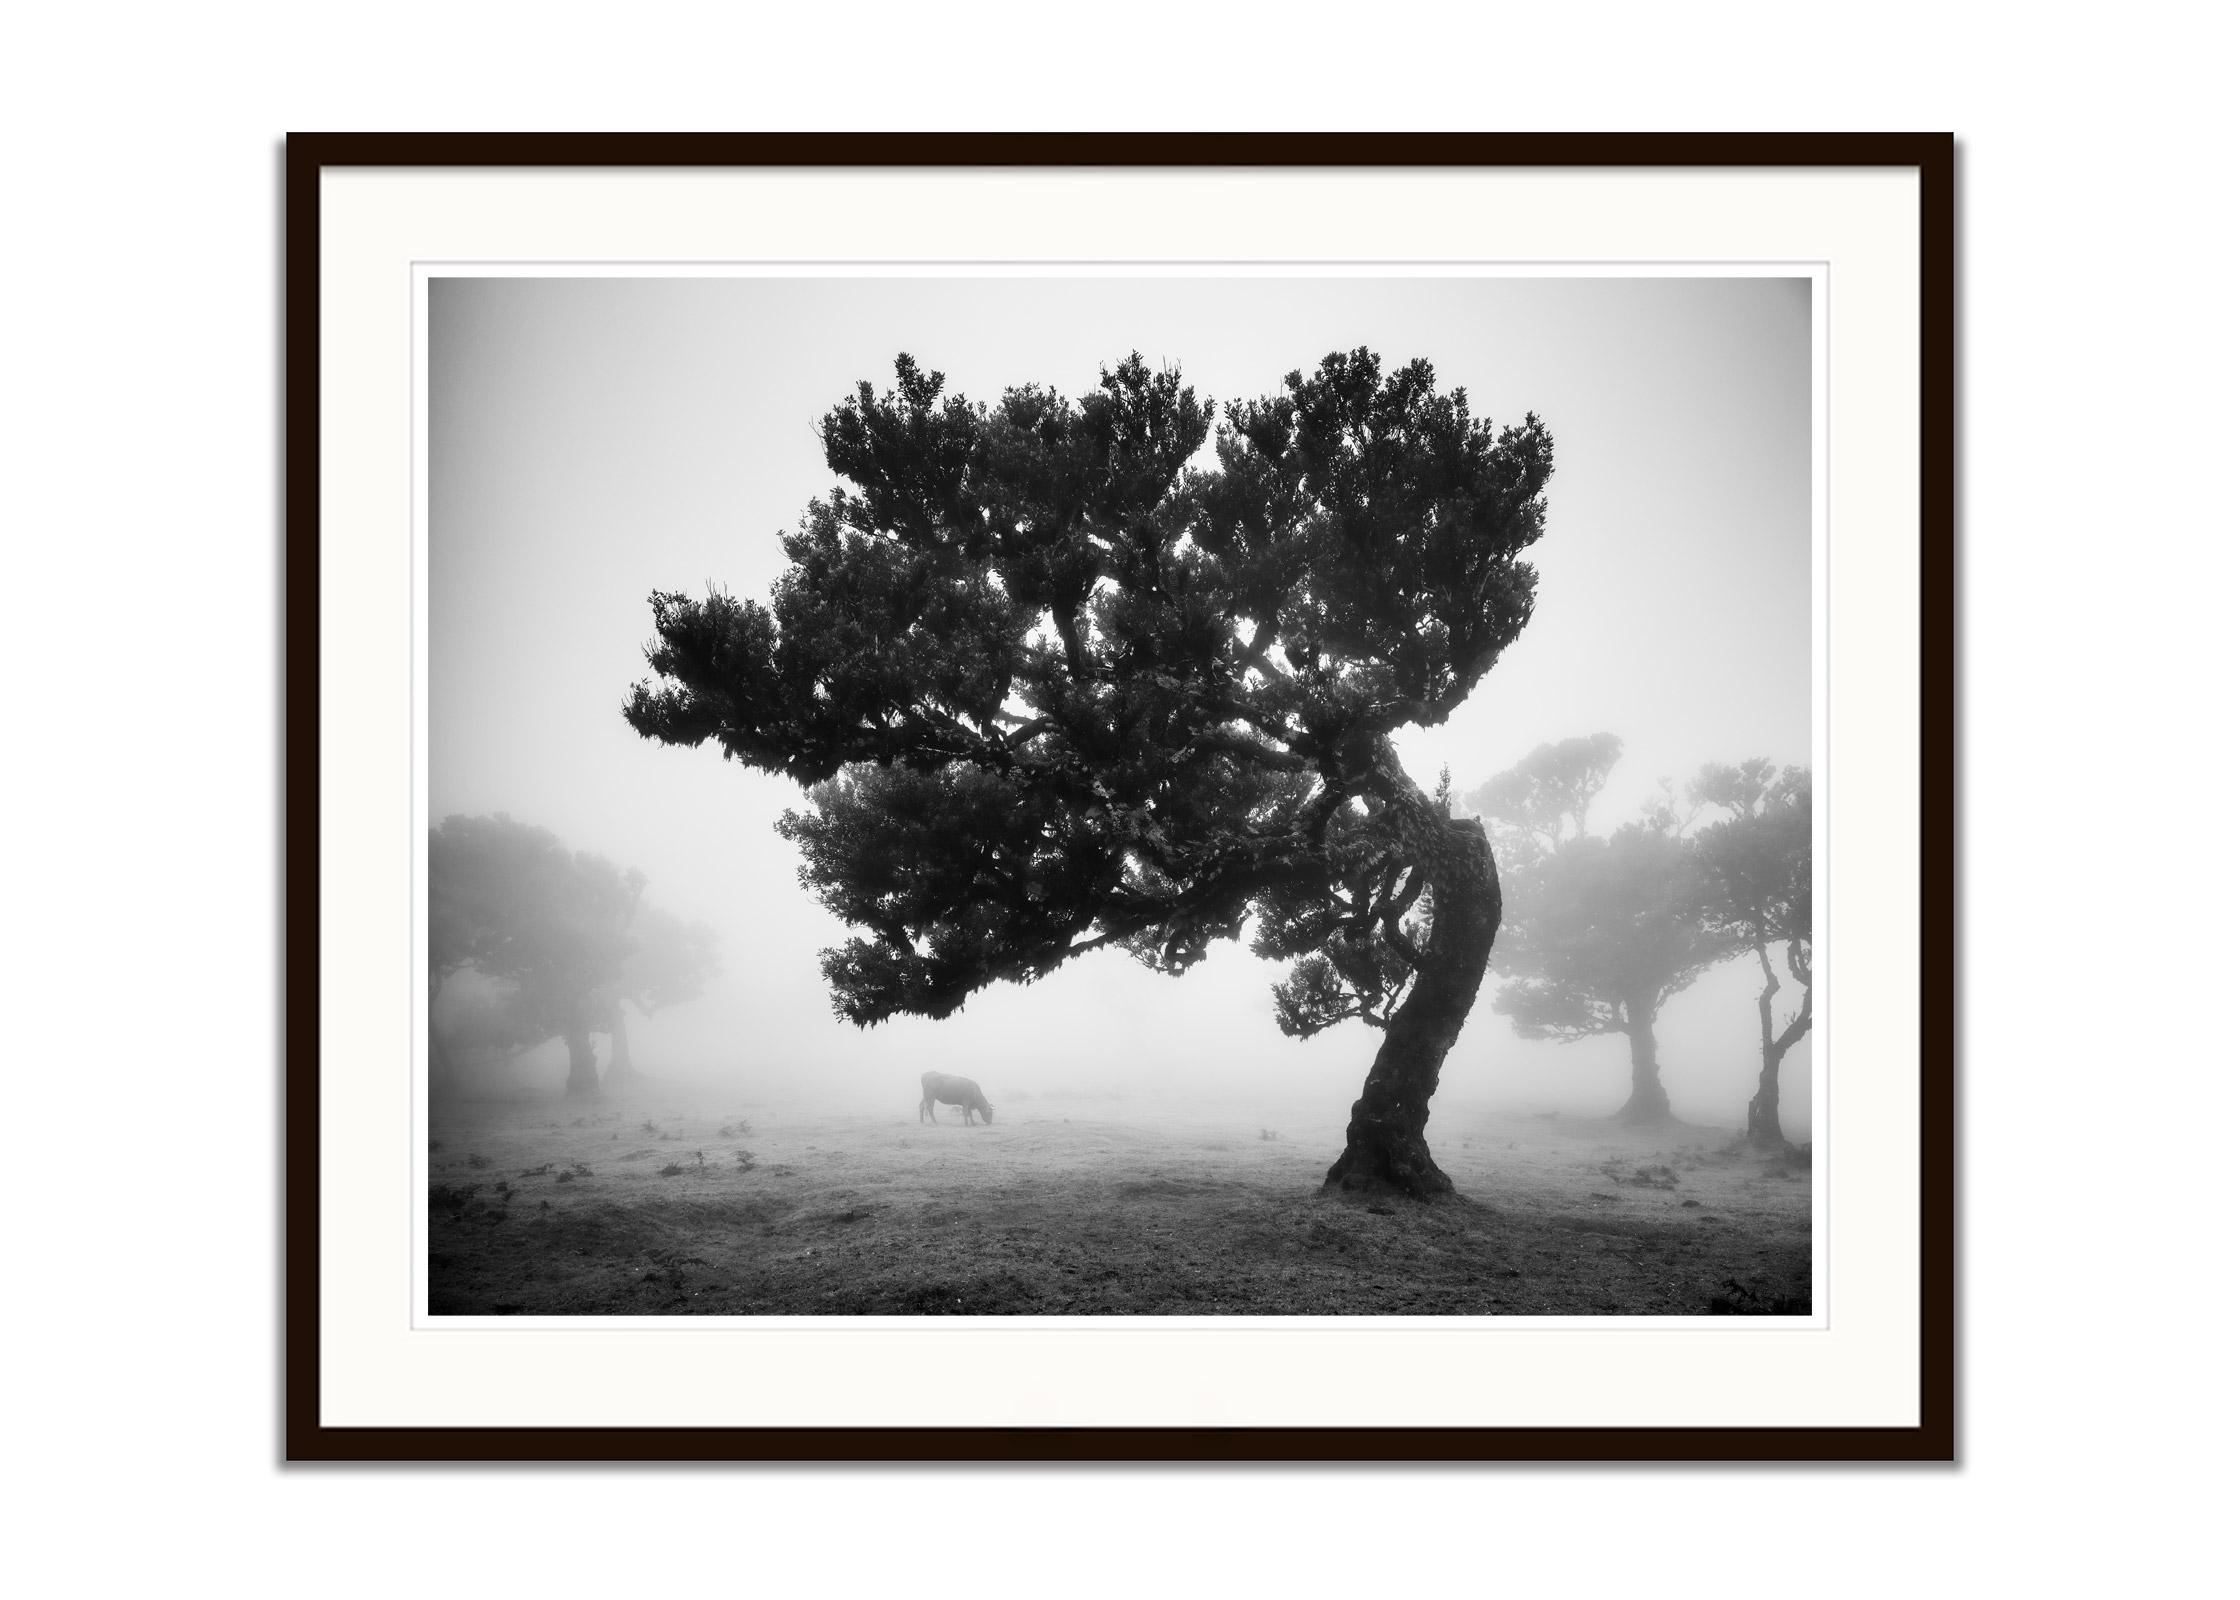 Black and white fine art landscape photography. Fairy forest of madeira in the fog with cows and crooked trees, Fanal, Portugal. Archival pigment ink print, edition of 7. Signed, titled, dated and numbered by artist. Certificate of authenticity